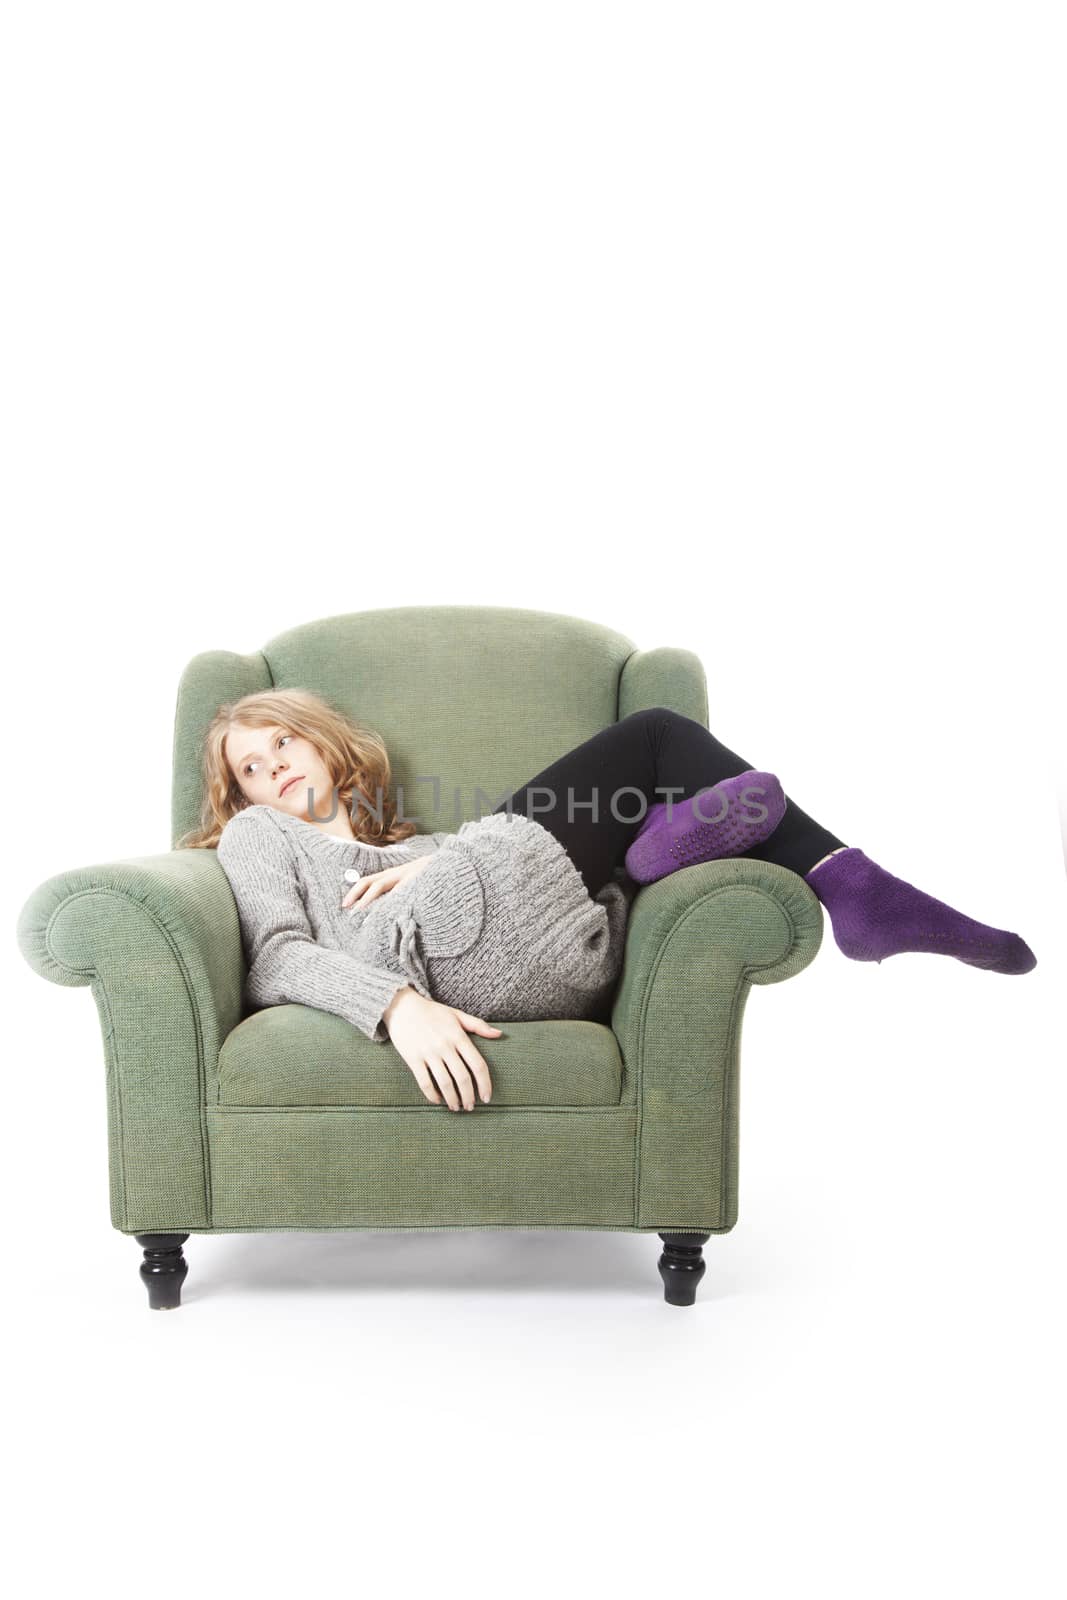 young woman relaxing in armchair against white background